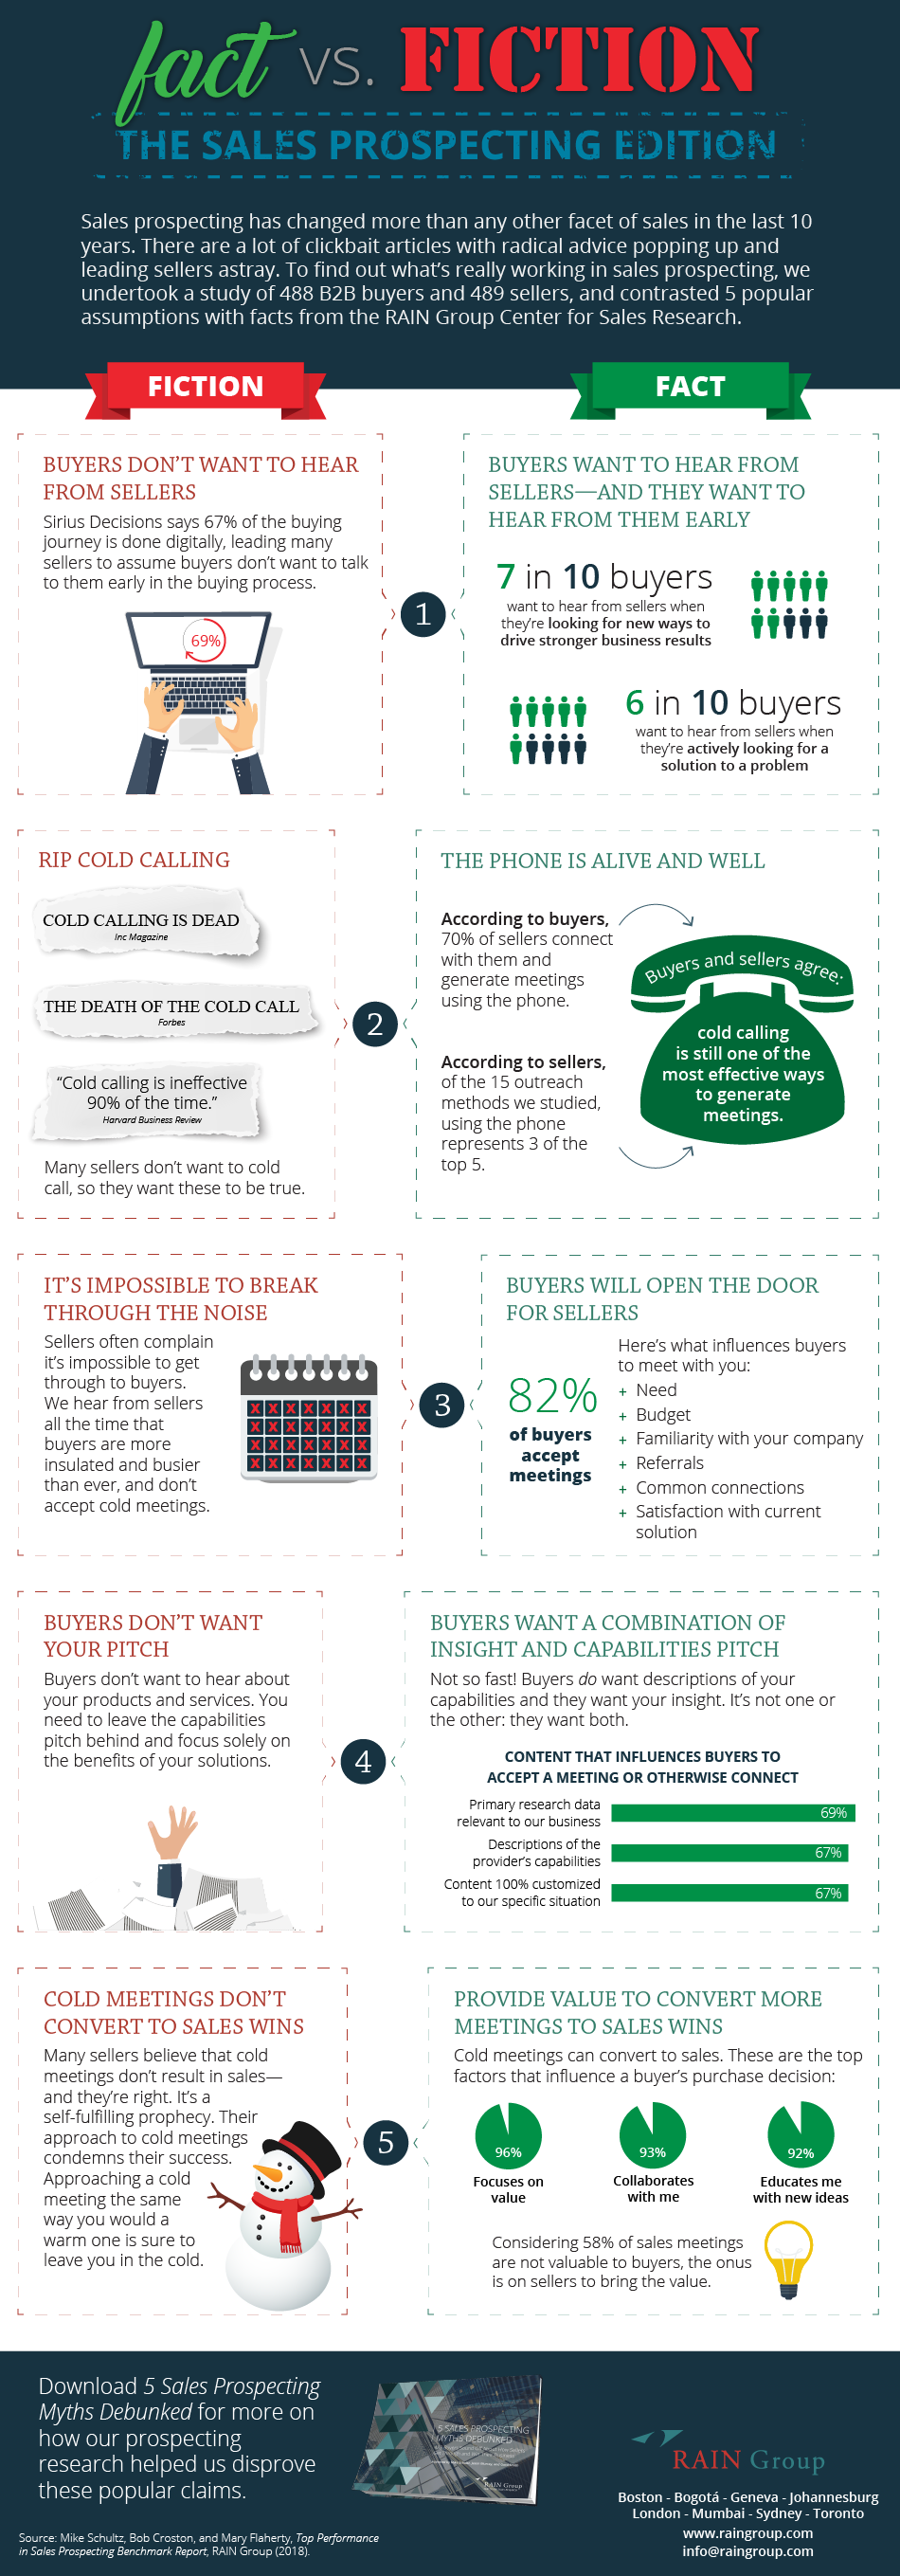 Infographic about sales prospecting comparing facts to fiction